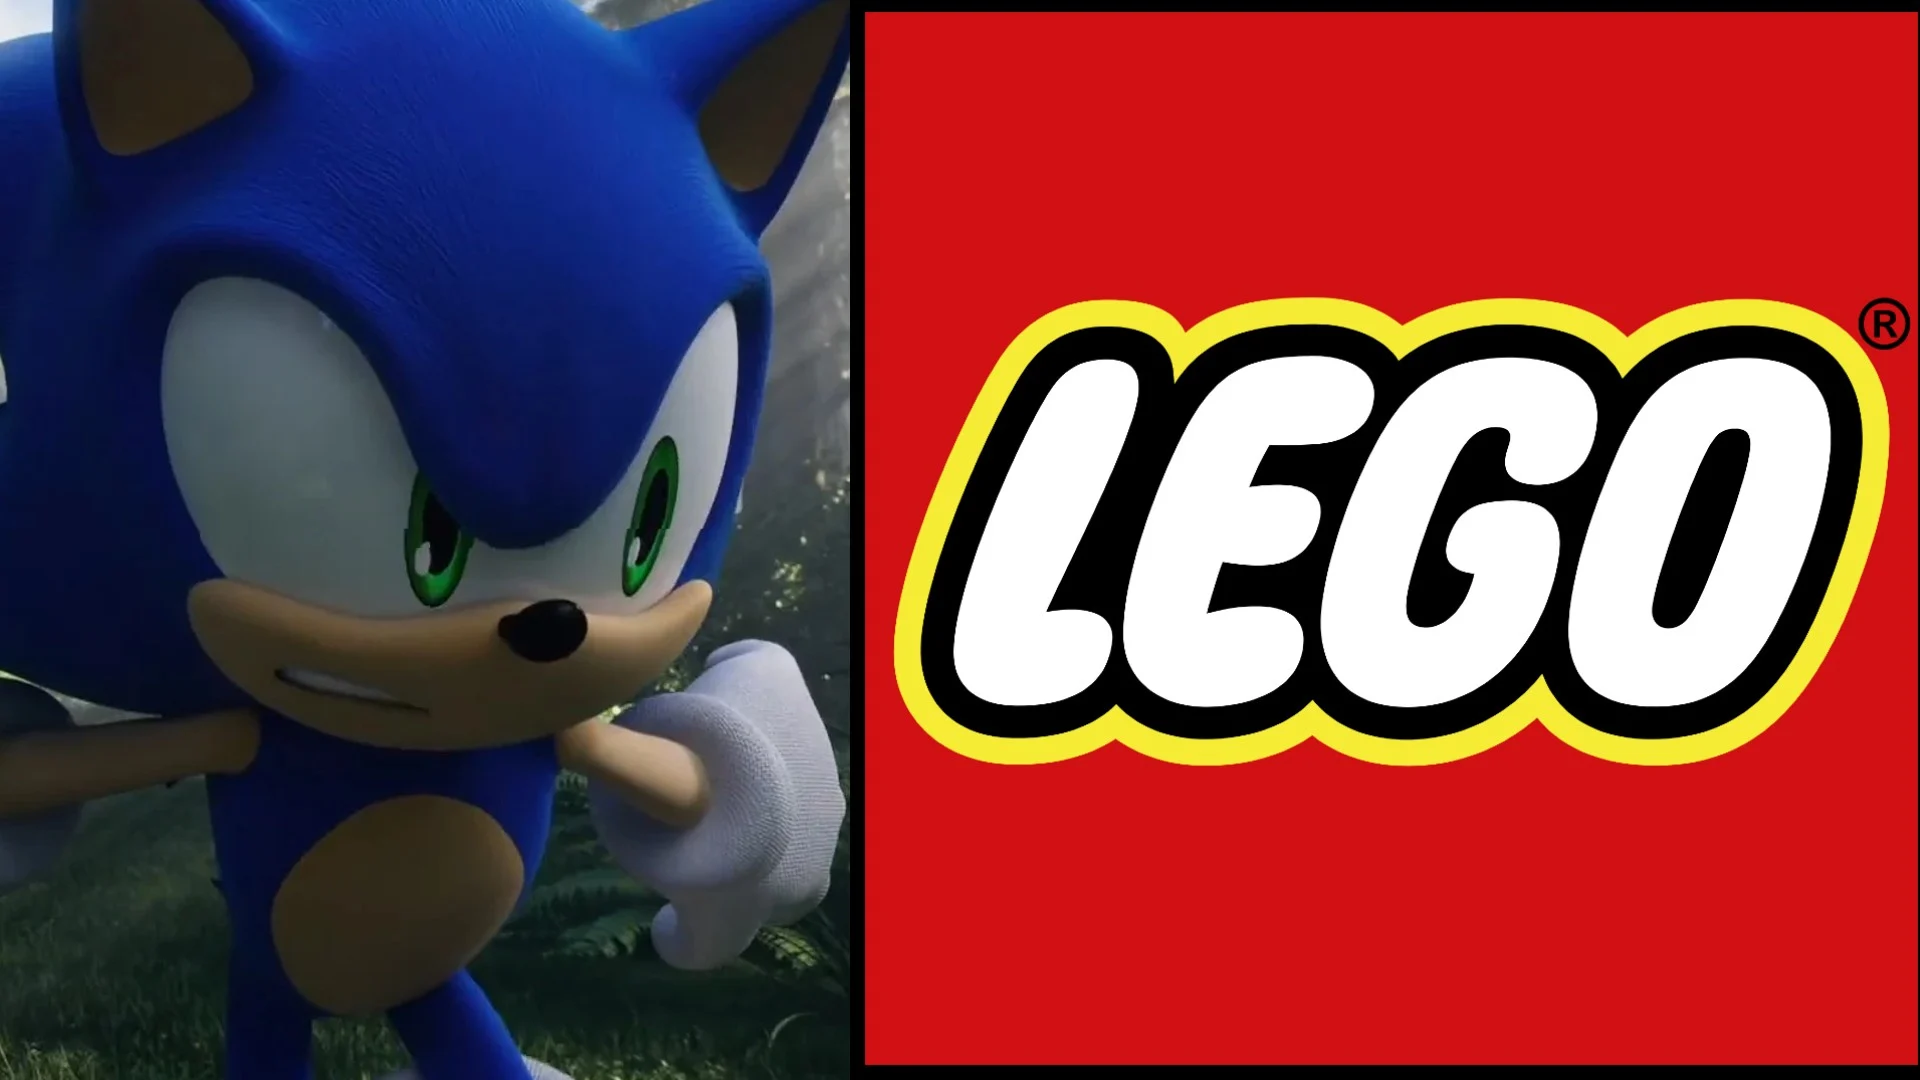 2 LEGO Sonic the Hedgehog Sets Rumoured For January 2024